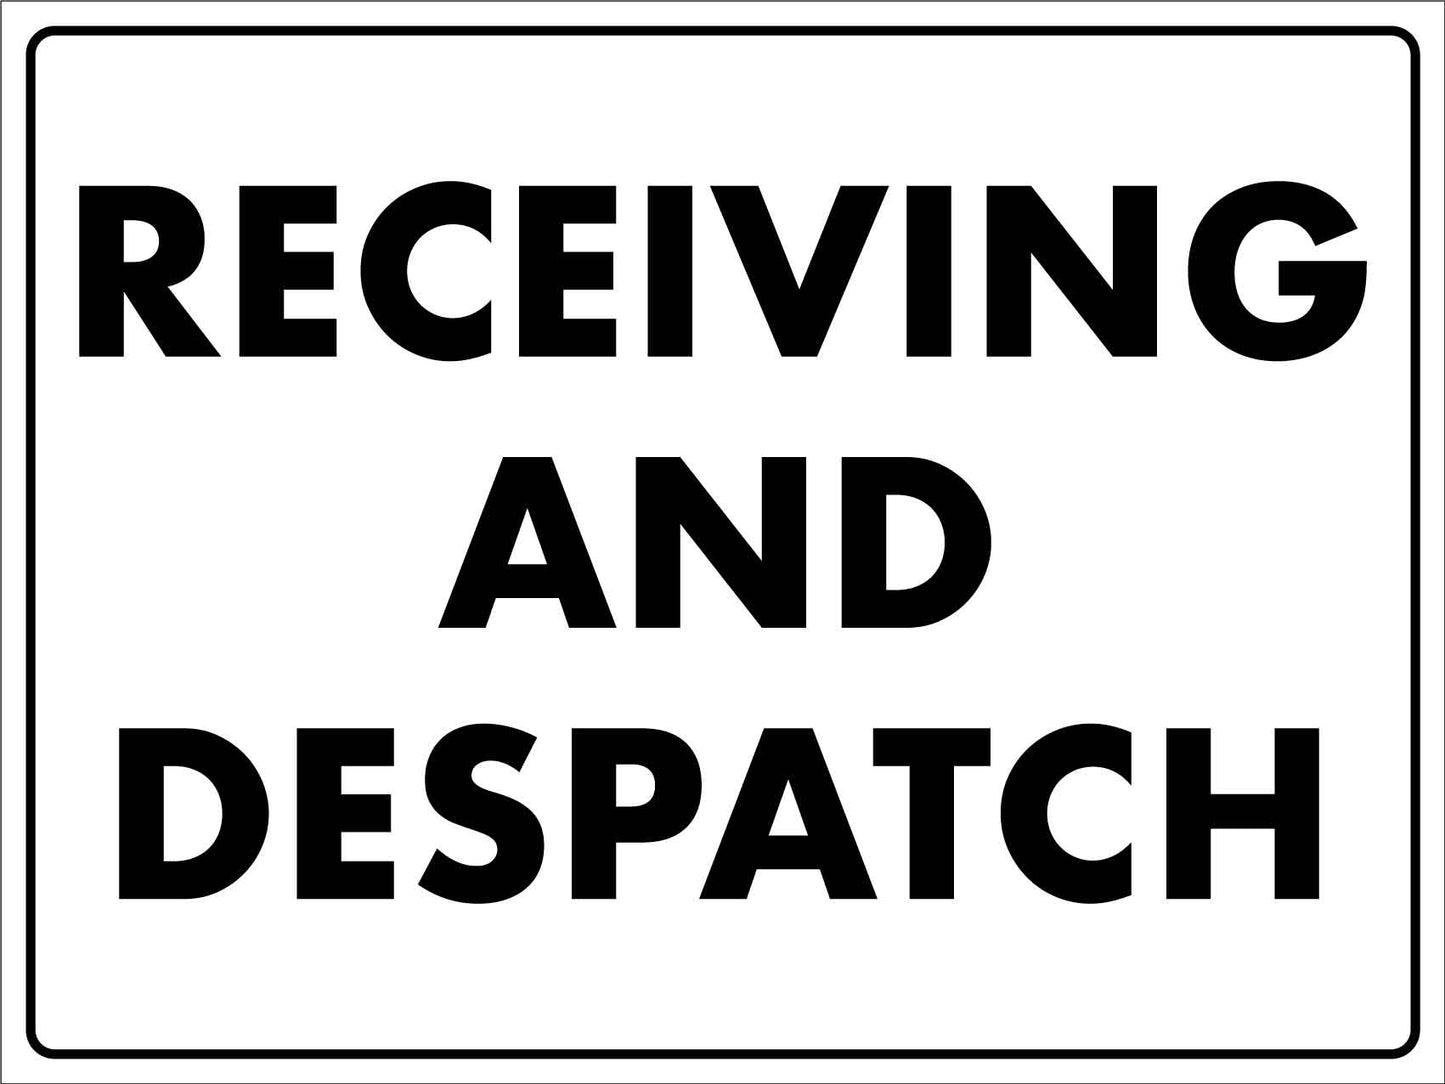 Receiving and Despatch Sign